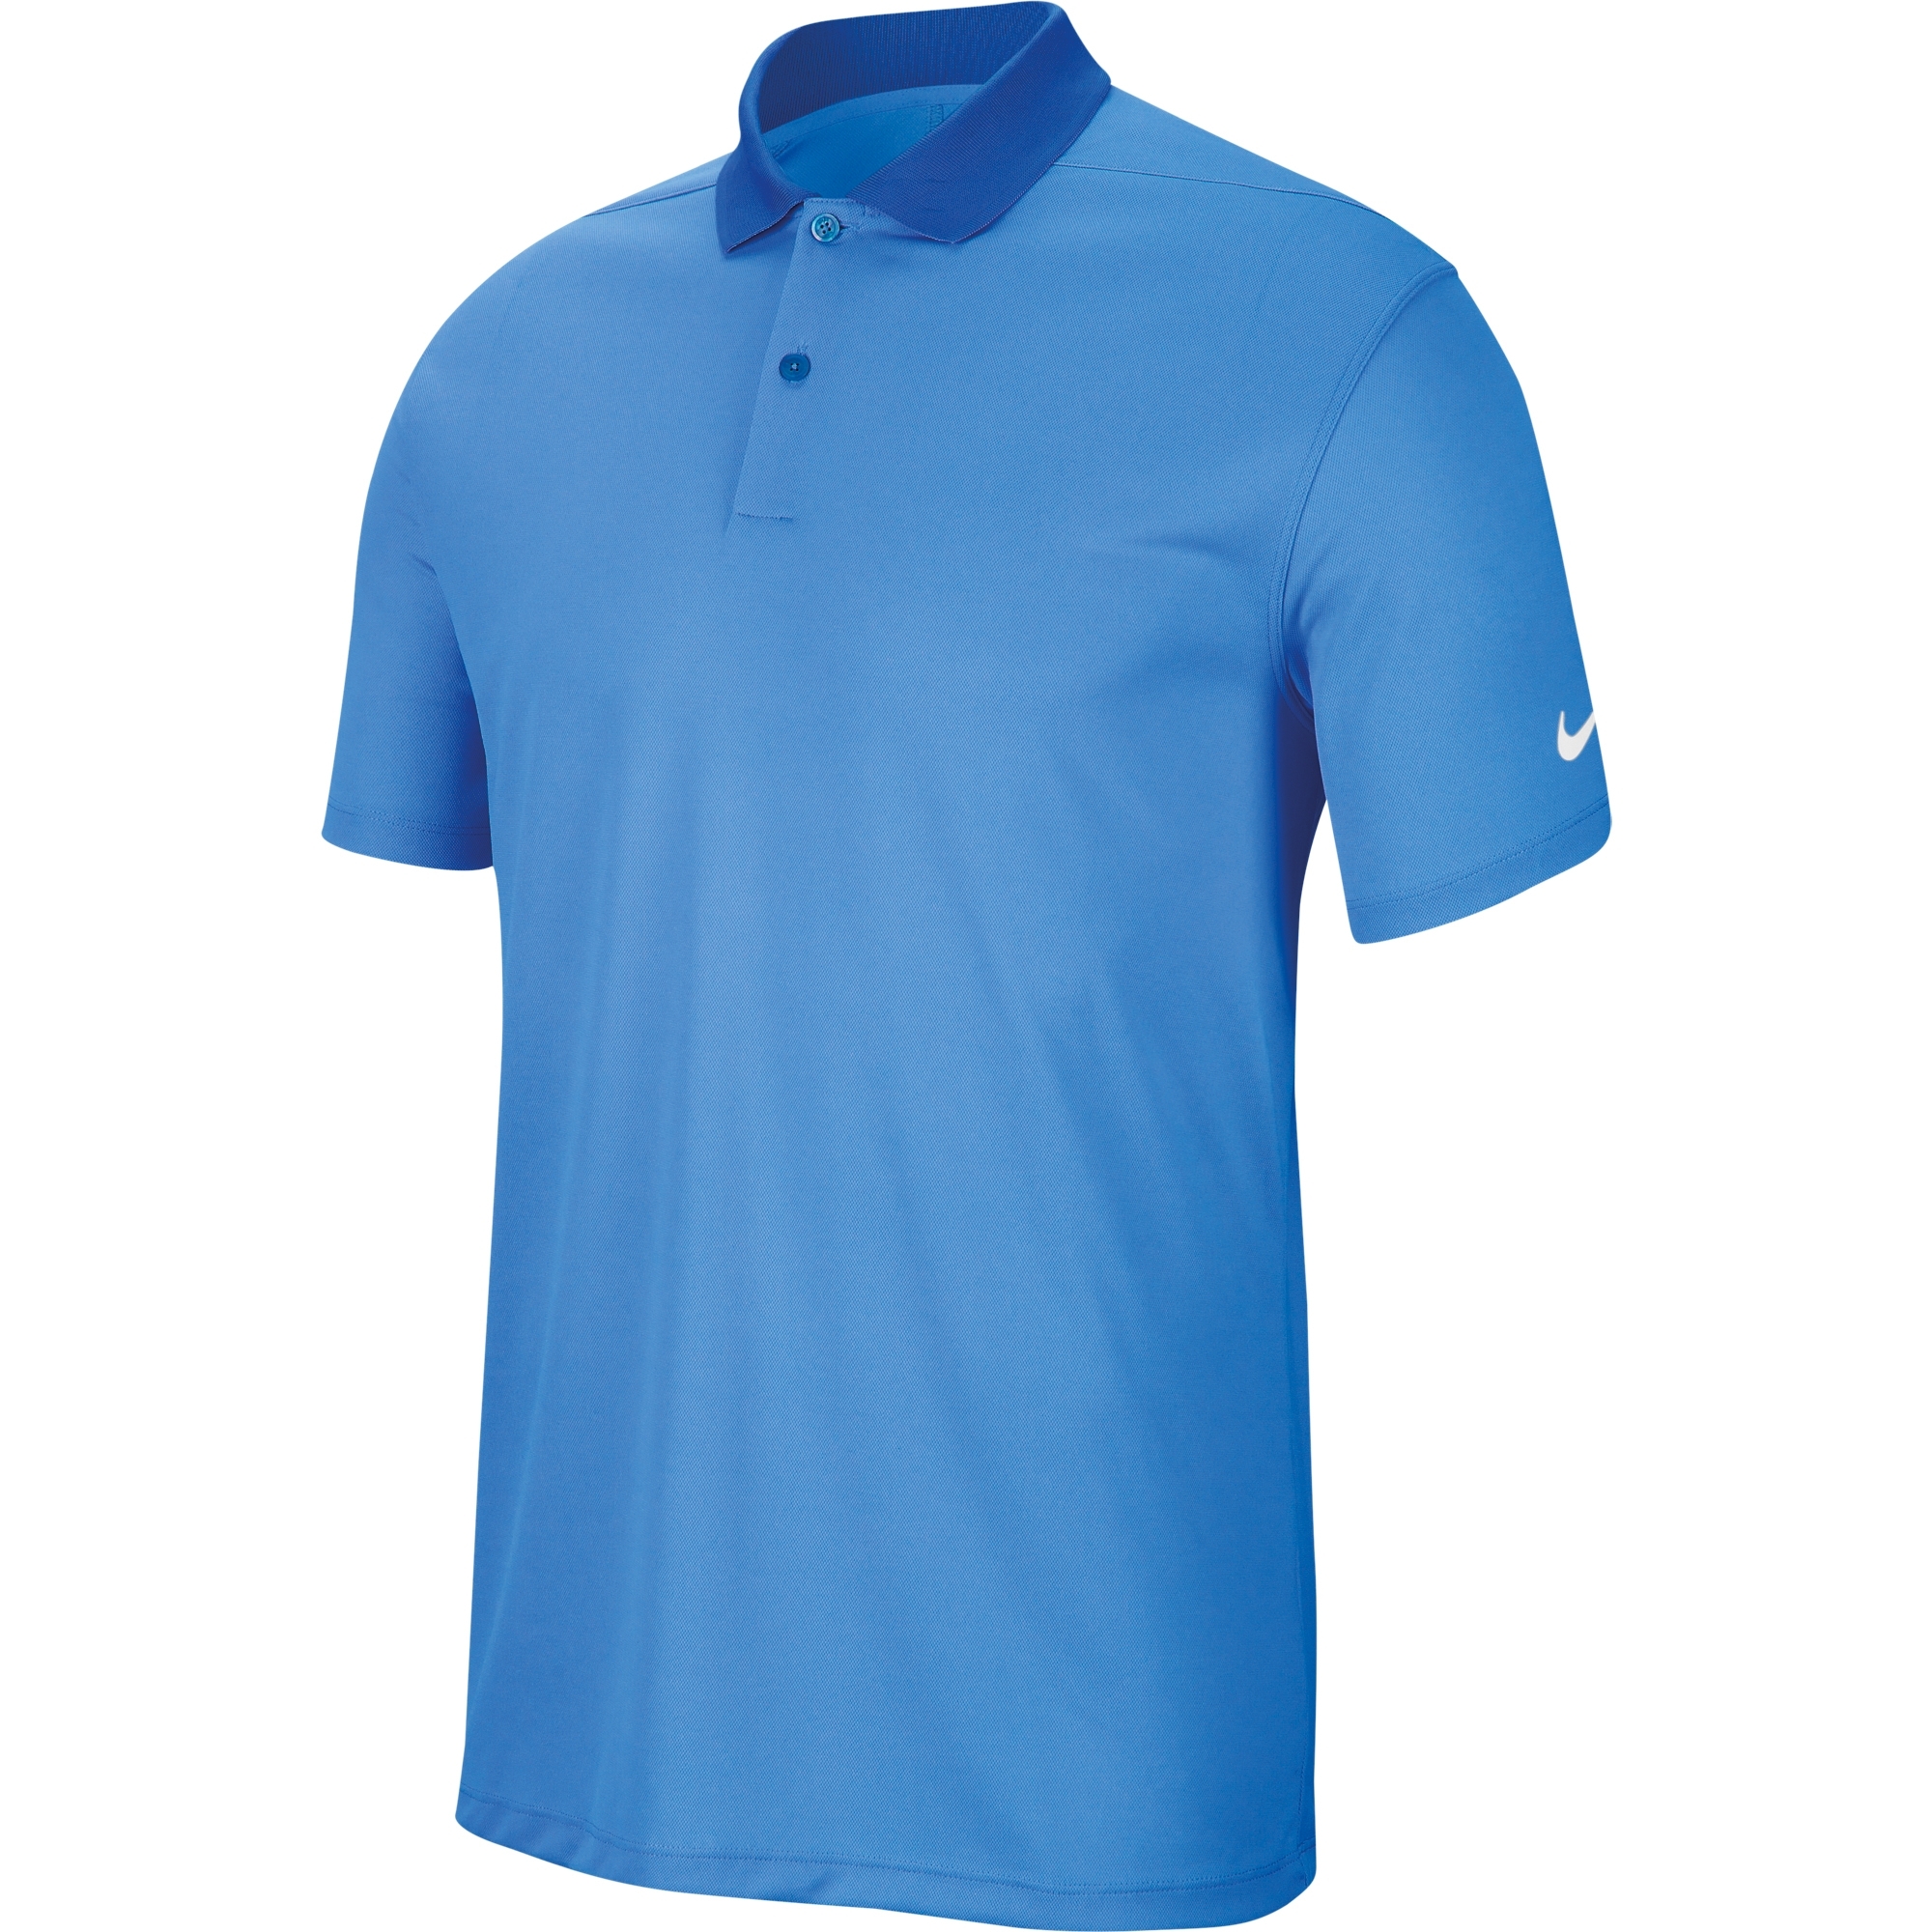 Nike Mens Dry Fit Solid Victory Golf Polo Shirt 2xl- Chest 48.5-53.5